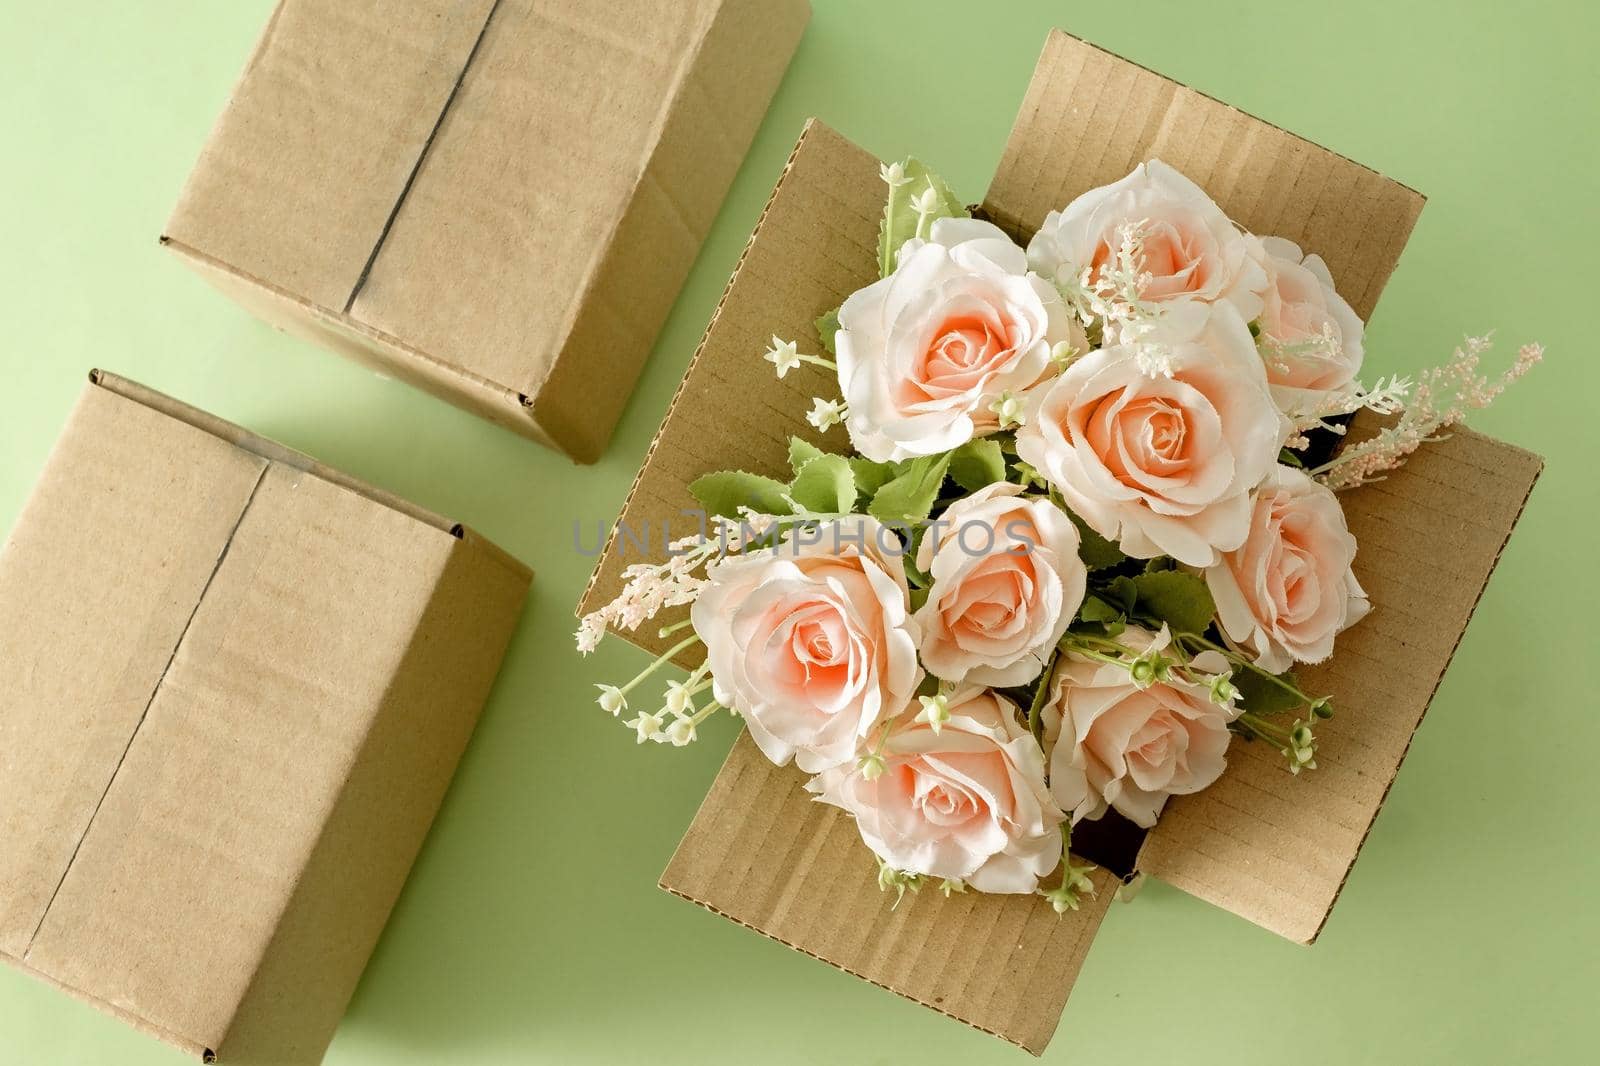 A beautiful blooming bouquet of pink roses in a parcel delivery cardboard box. Gift holiday concept and logistics service. by sergii_gnatiuk